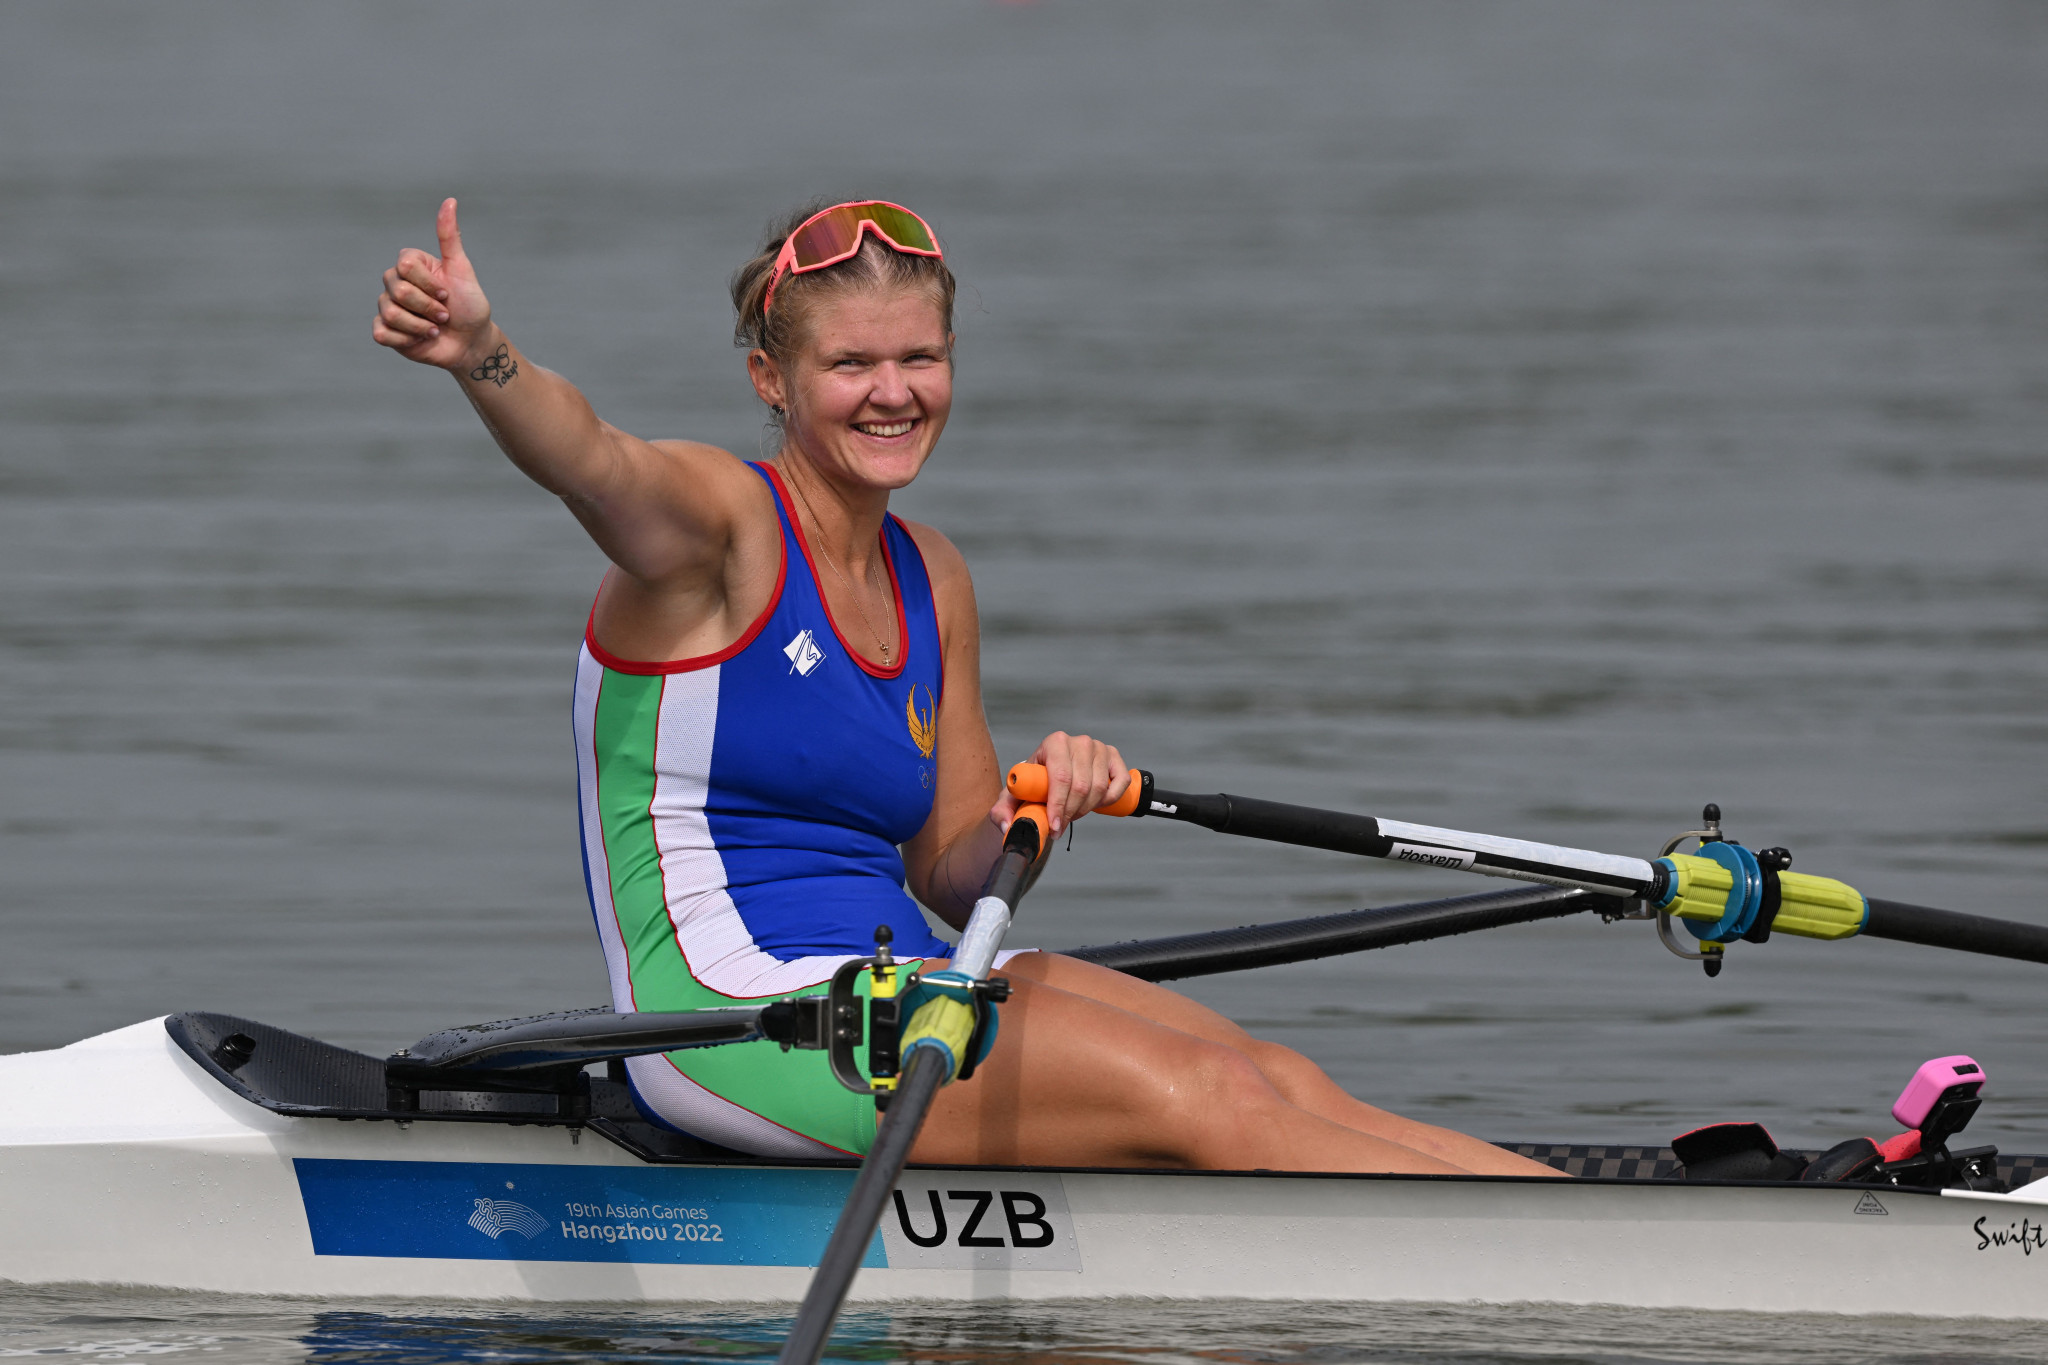 Olympic medallist Prakaten wins rowing gold for Uzbekistan at Hangzhou 2022 after Russia switch